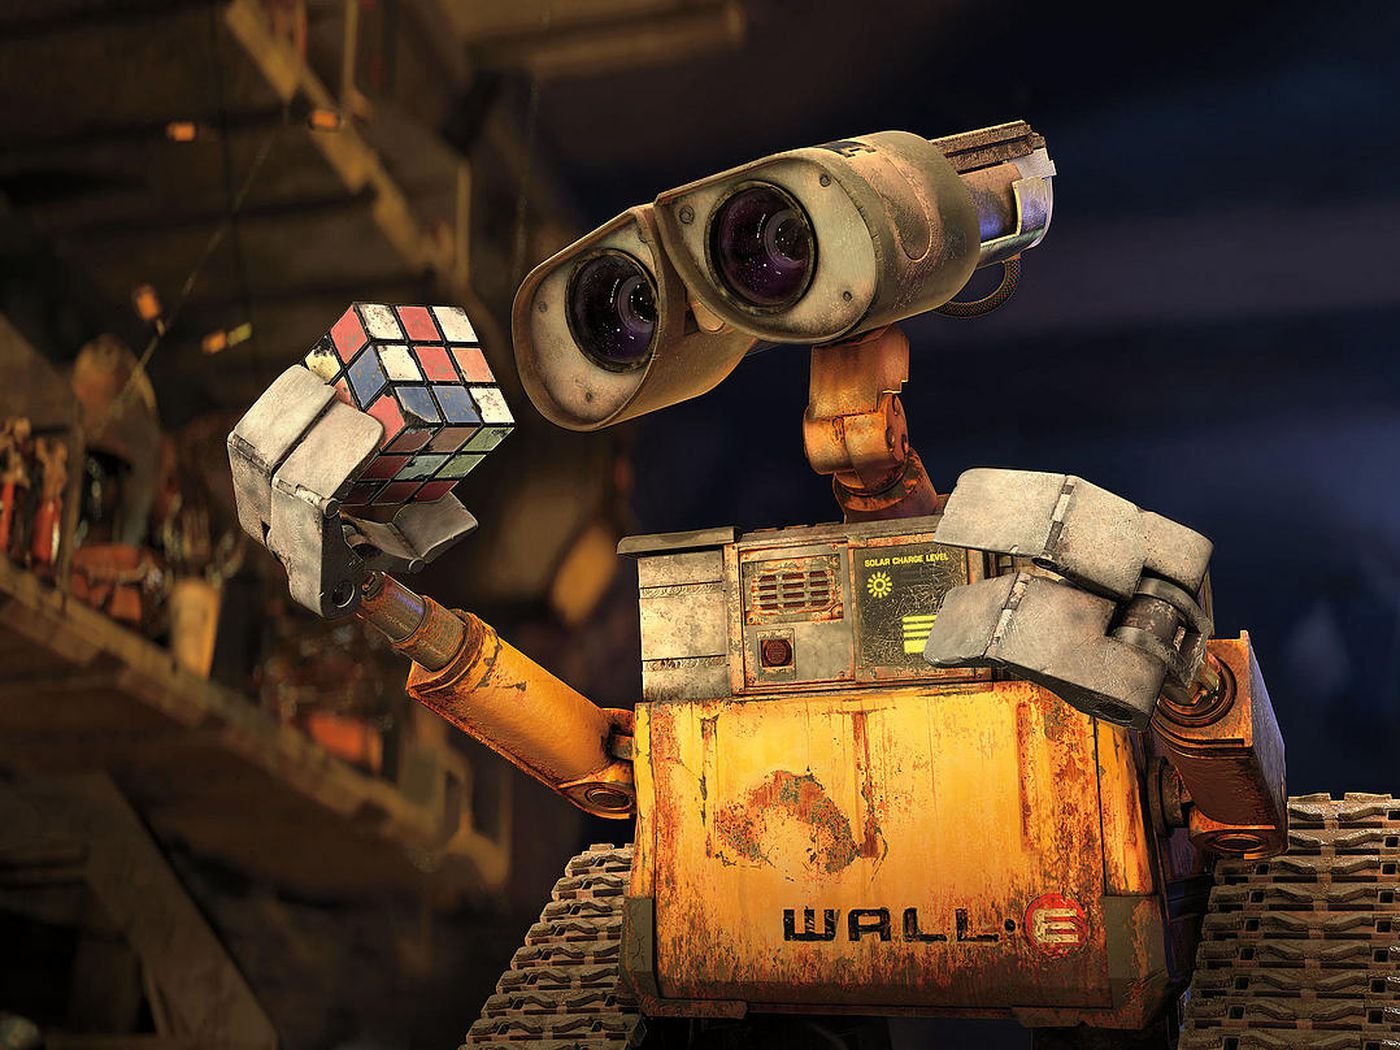 What is the deeper meaning behind WALL-E?